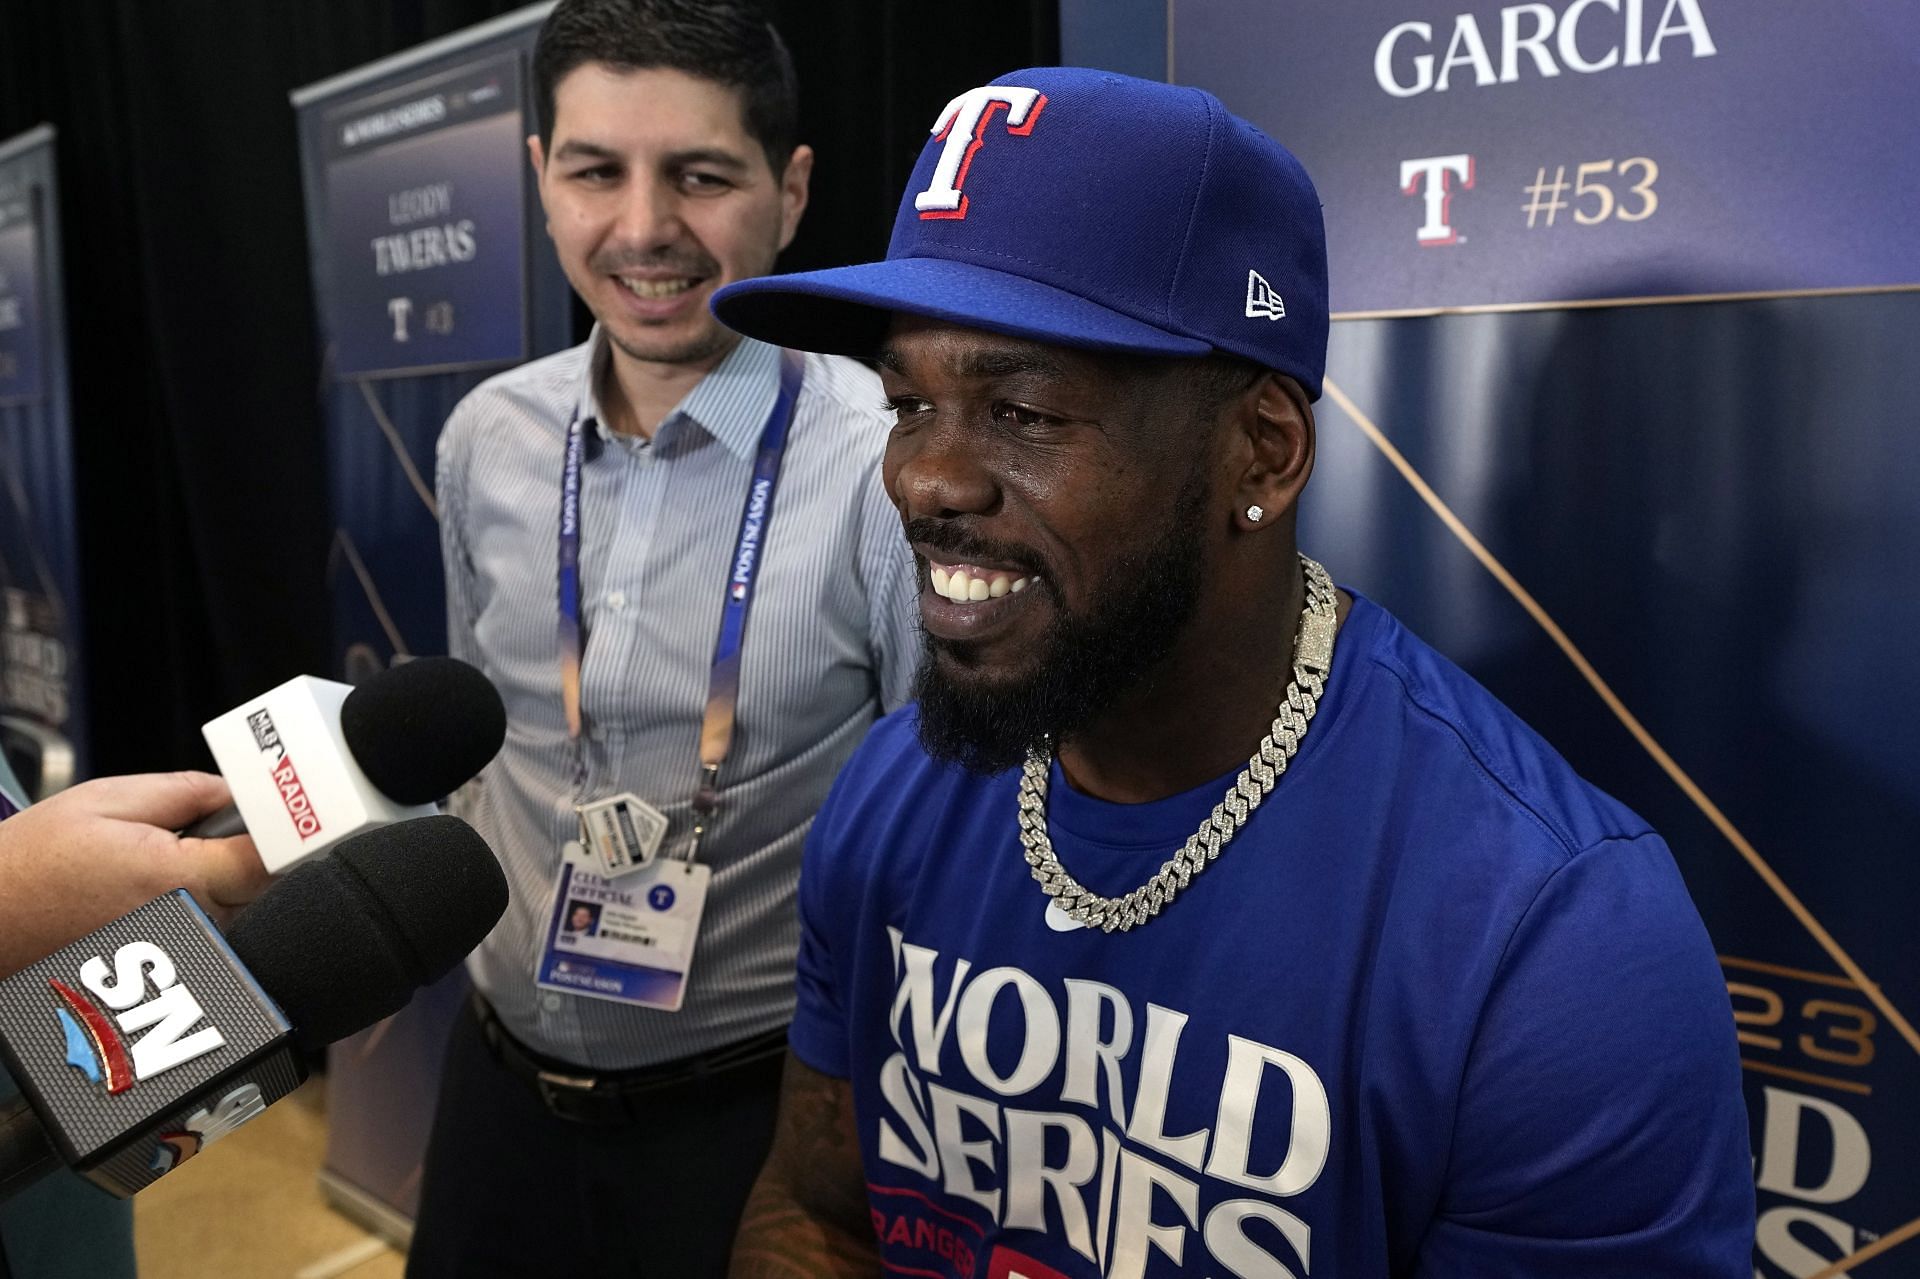 Texas Rangers right fielder Adolis Garcia answers a question during a World Series baseball media day